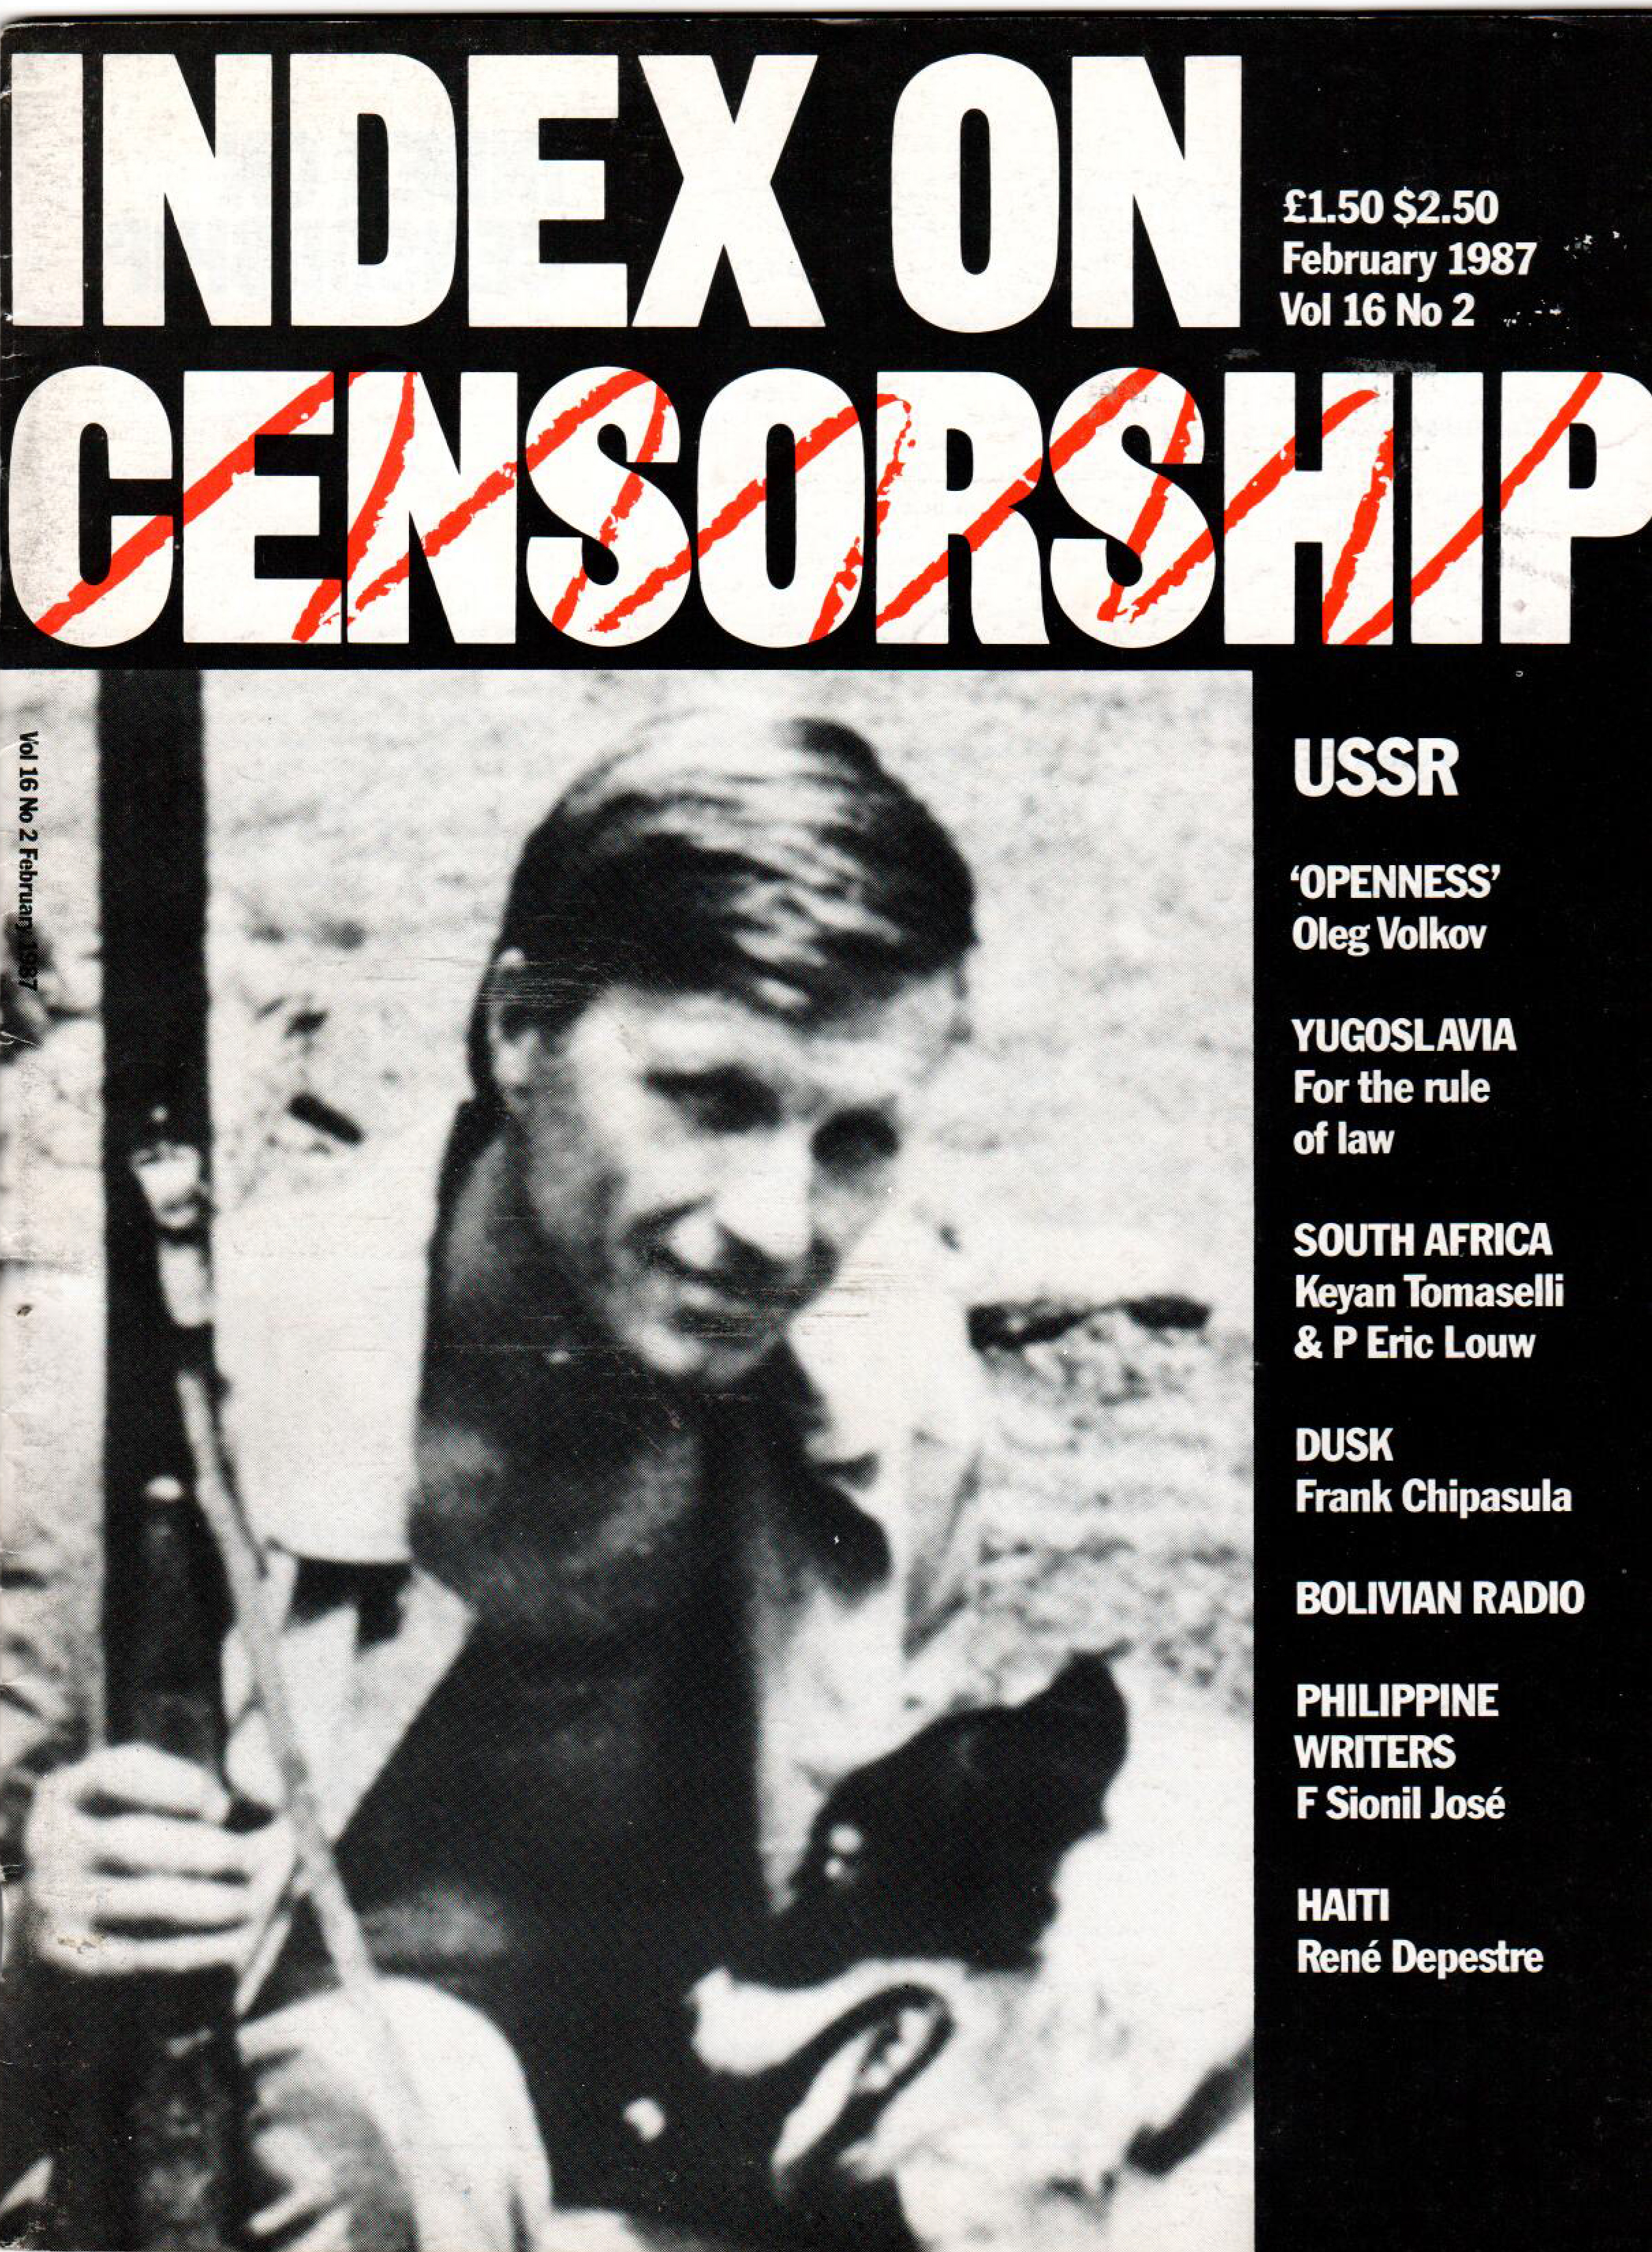 USSR: Gorbachev's new "openness" policies, the February 1987 issue of Index on Censorship magazine.